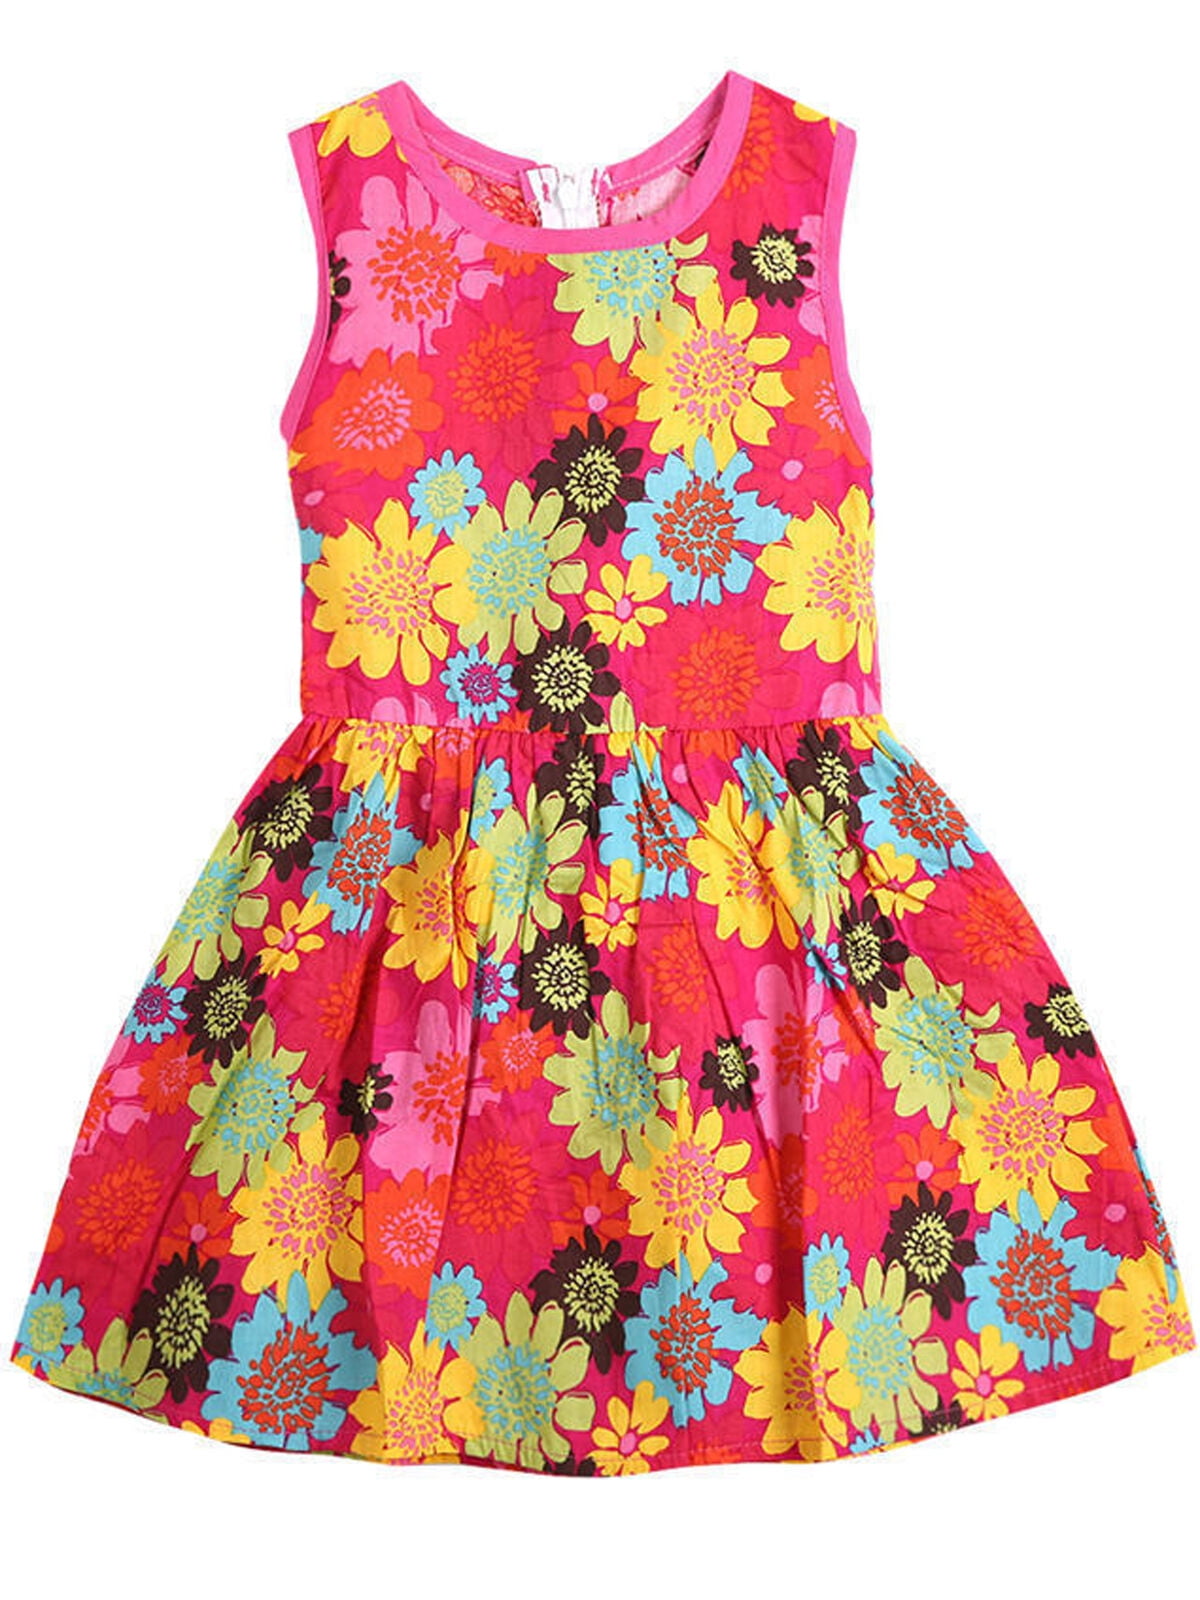 Polyester Casual Girls Clothes Summer Dress Kids Girl Princess Floral ...